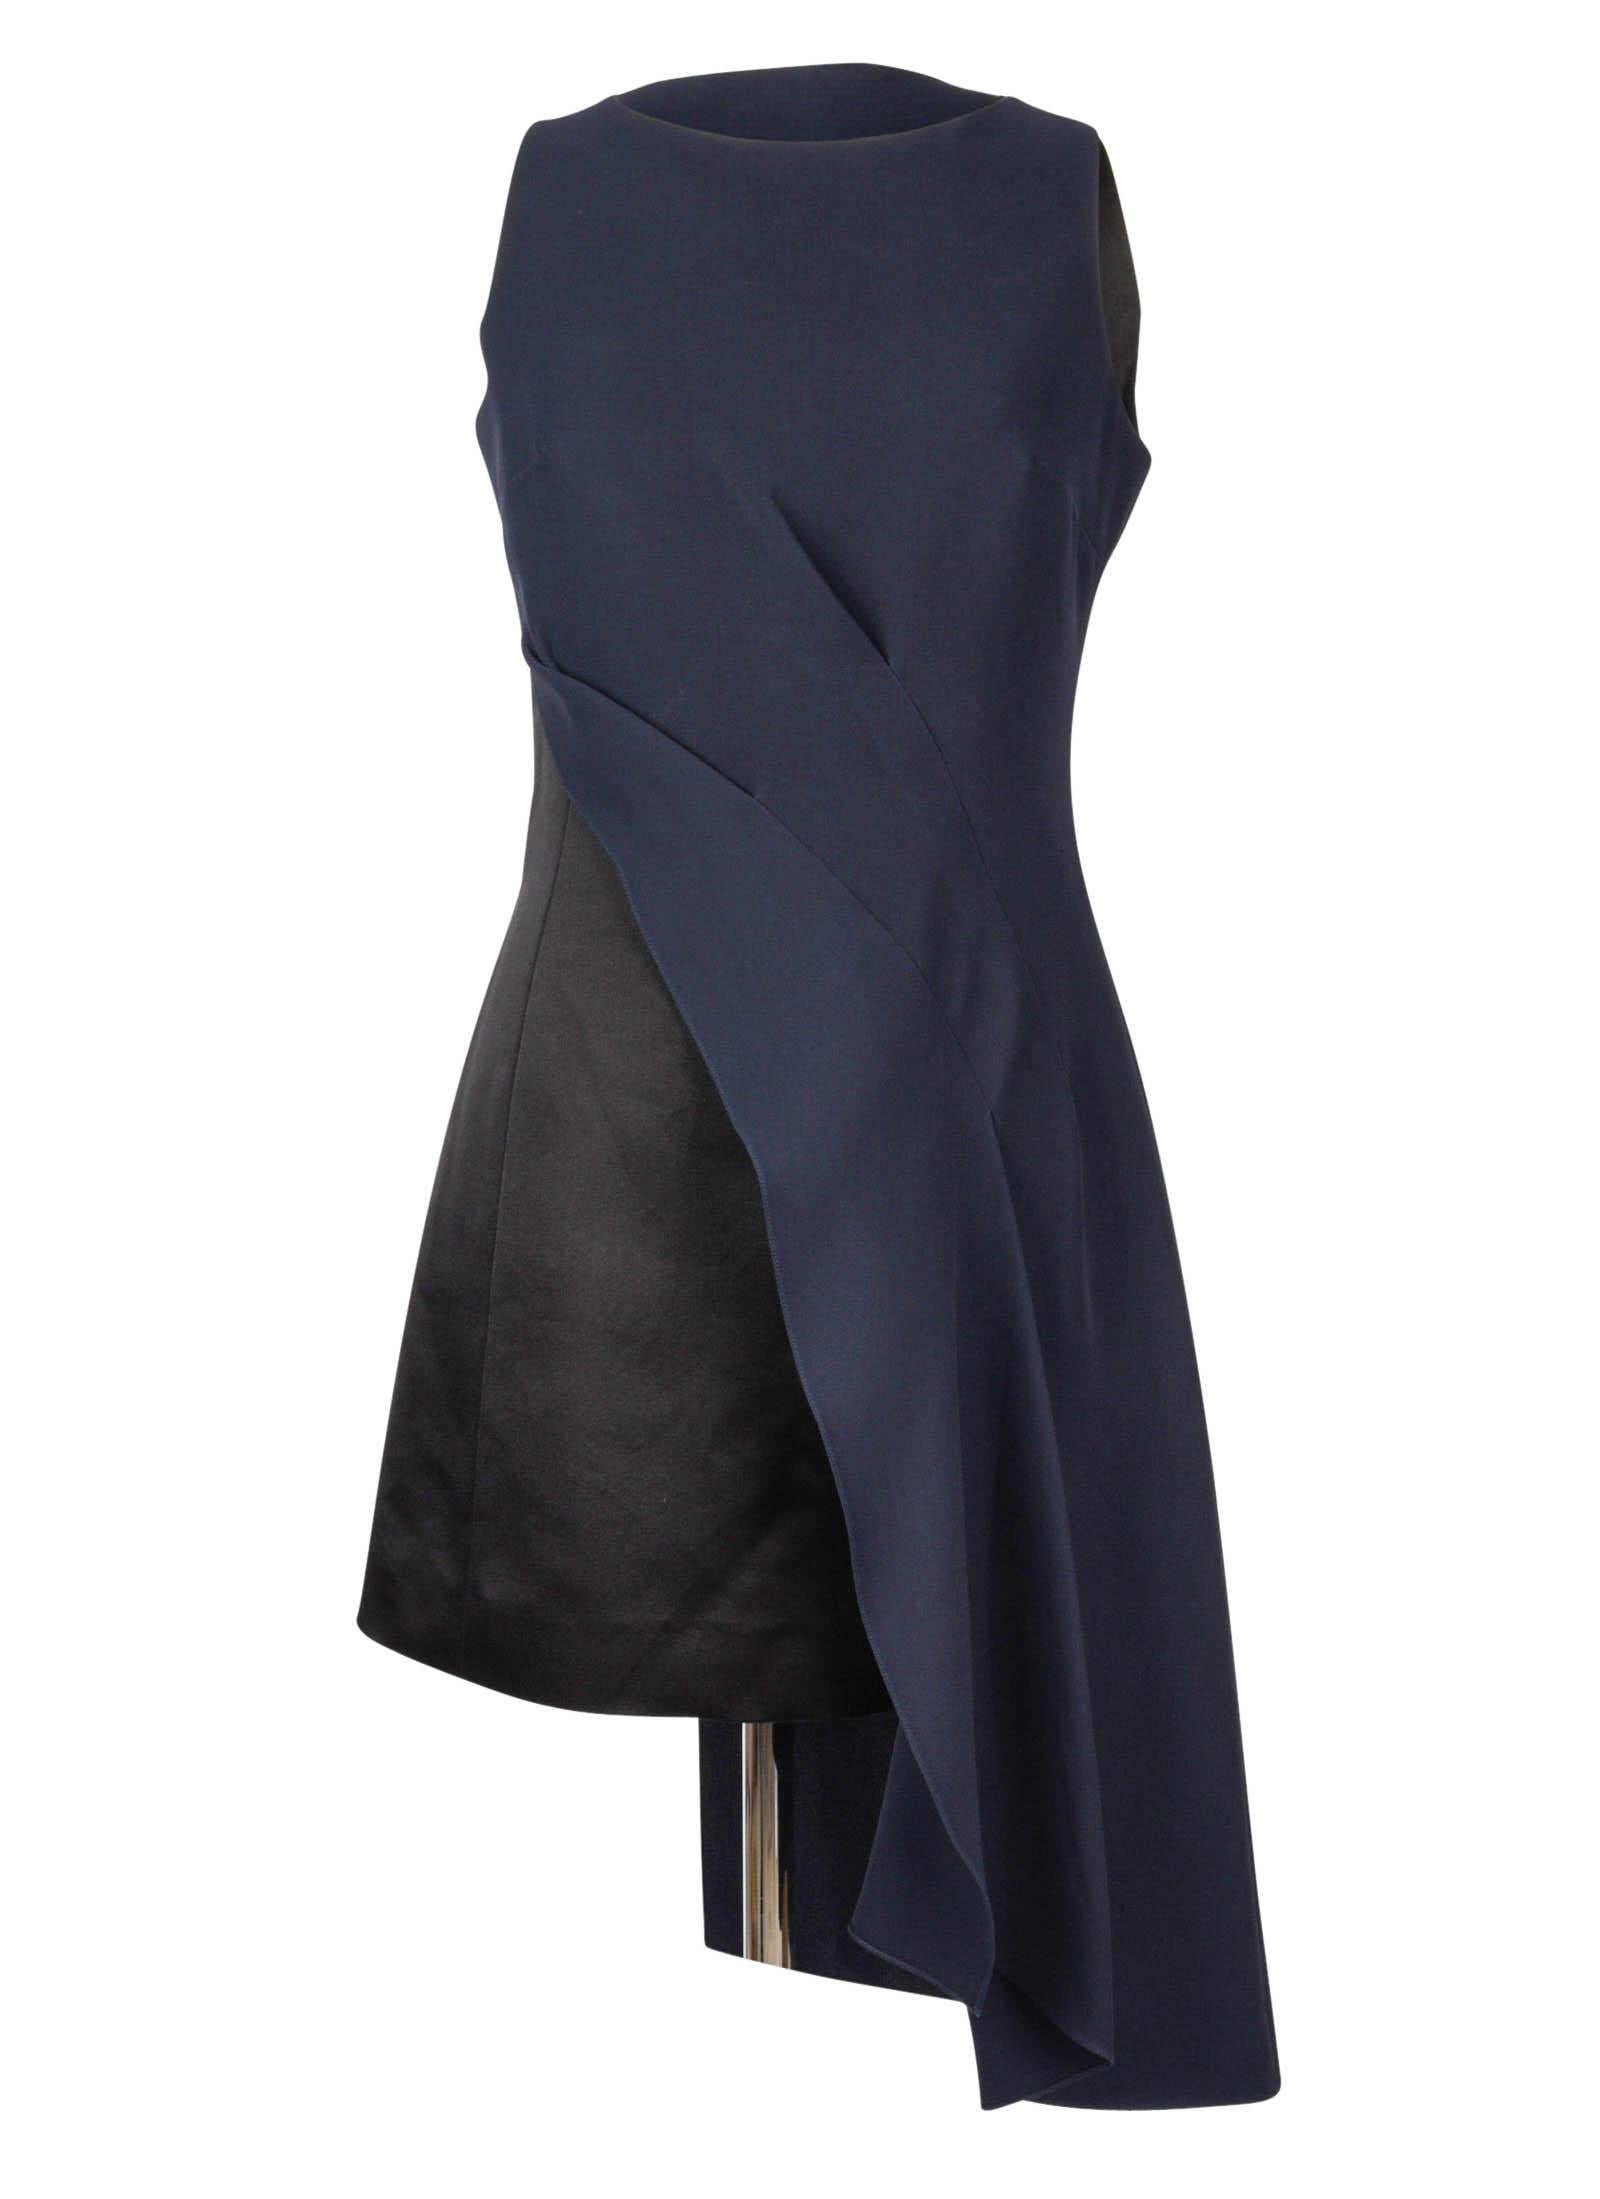 Guaranteed authentic Christian Dior black and navy asymmetrical dress with architectural detail.
Sleeveless black sheath with rear zip has an asymmetrical navy overlay.
A stunning dress with beautiful drape.
The overlay falls 9.5